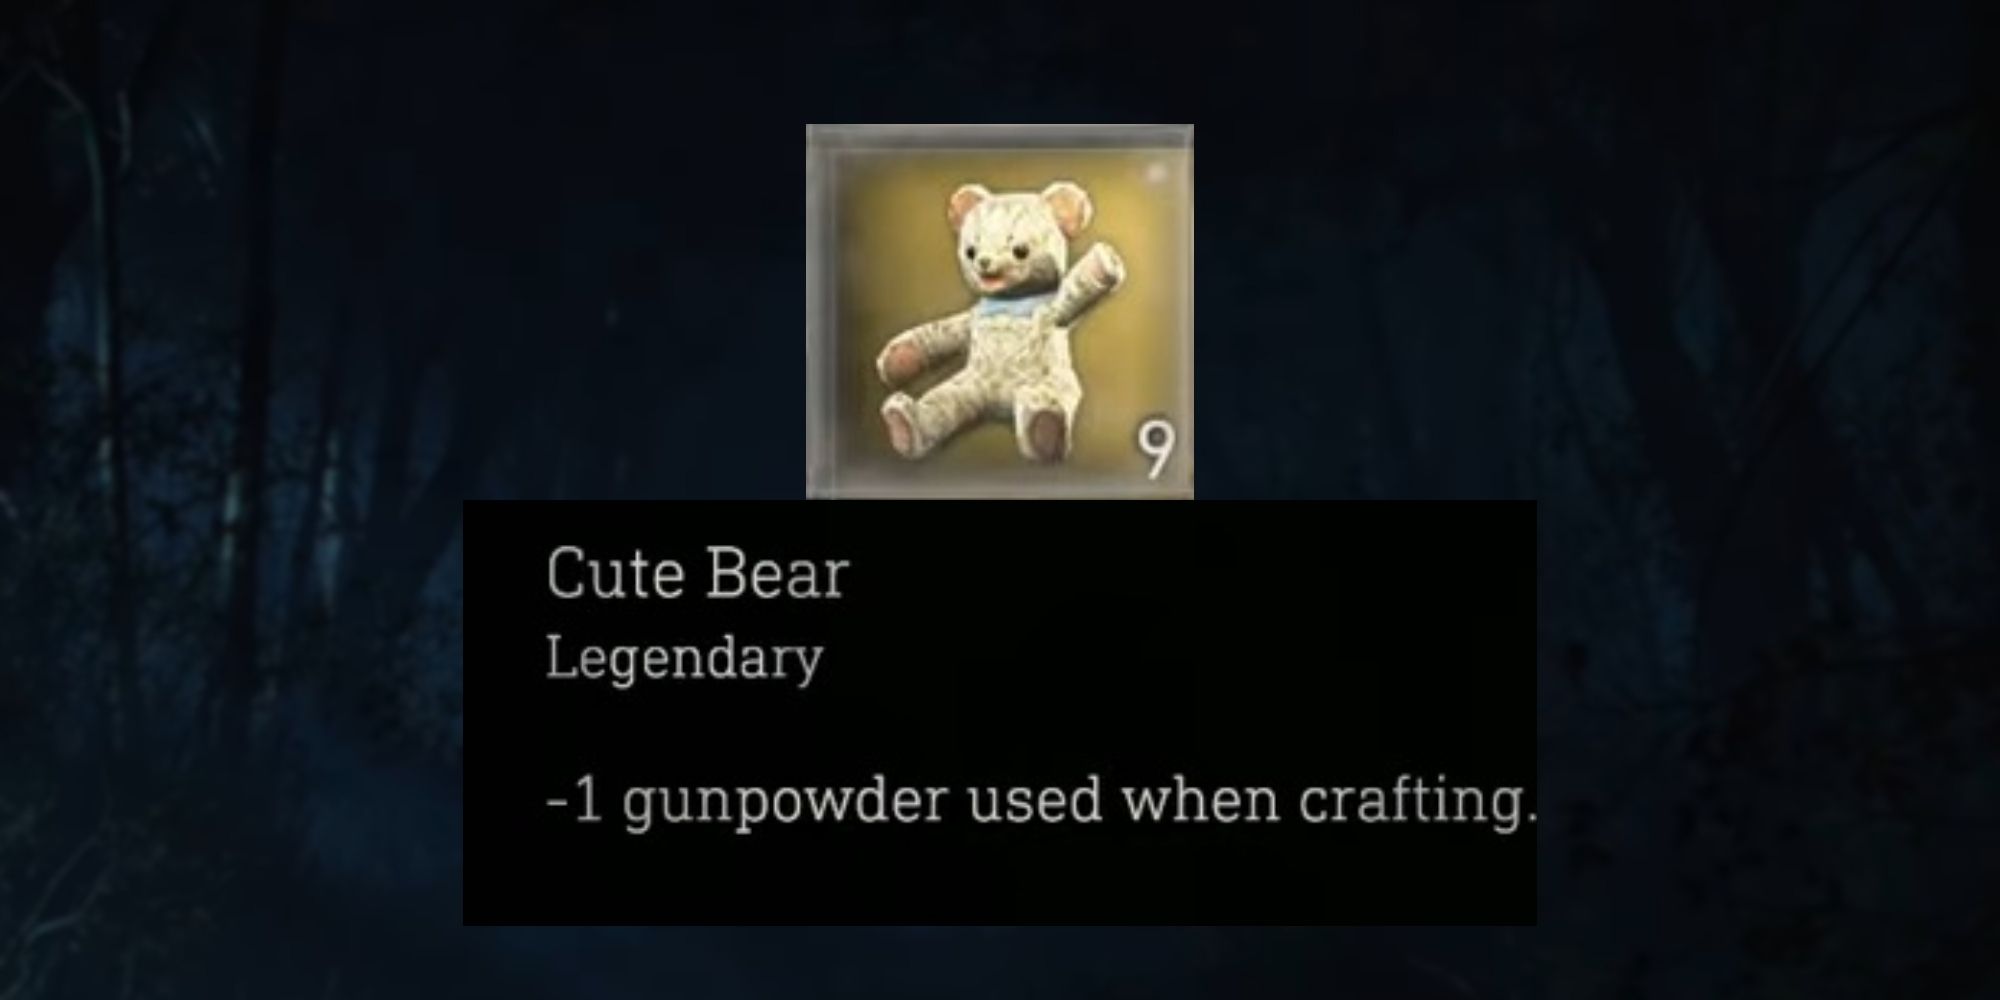 The Cute Bear charm from Resident Evil 4 Remake.